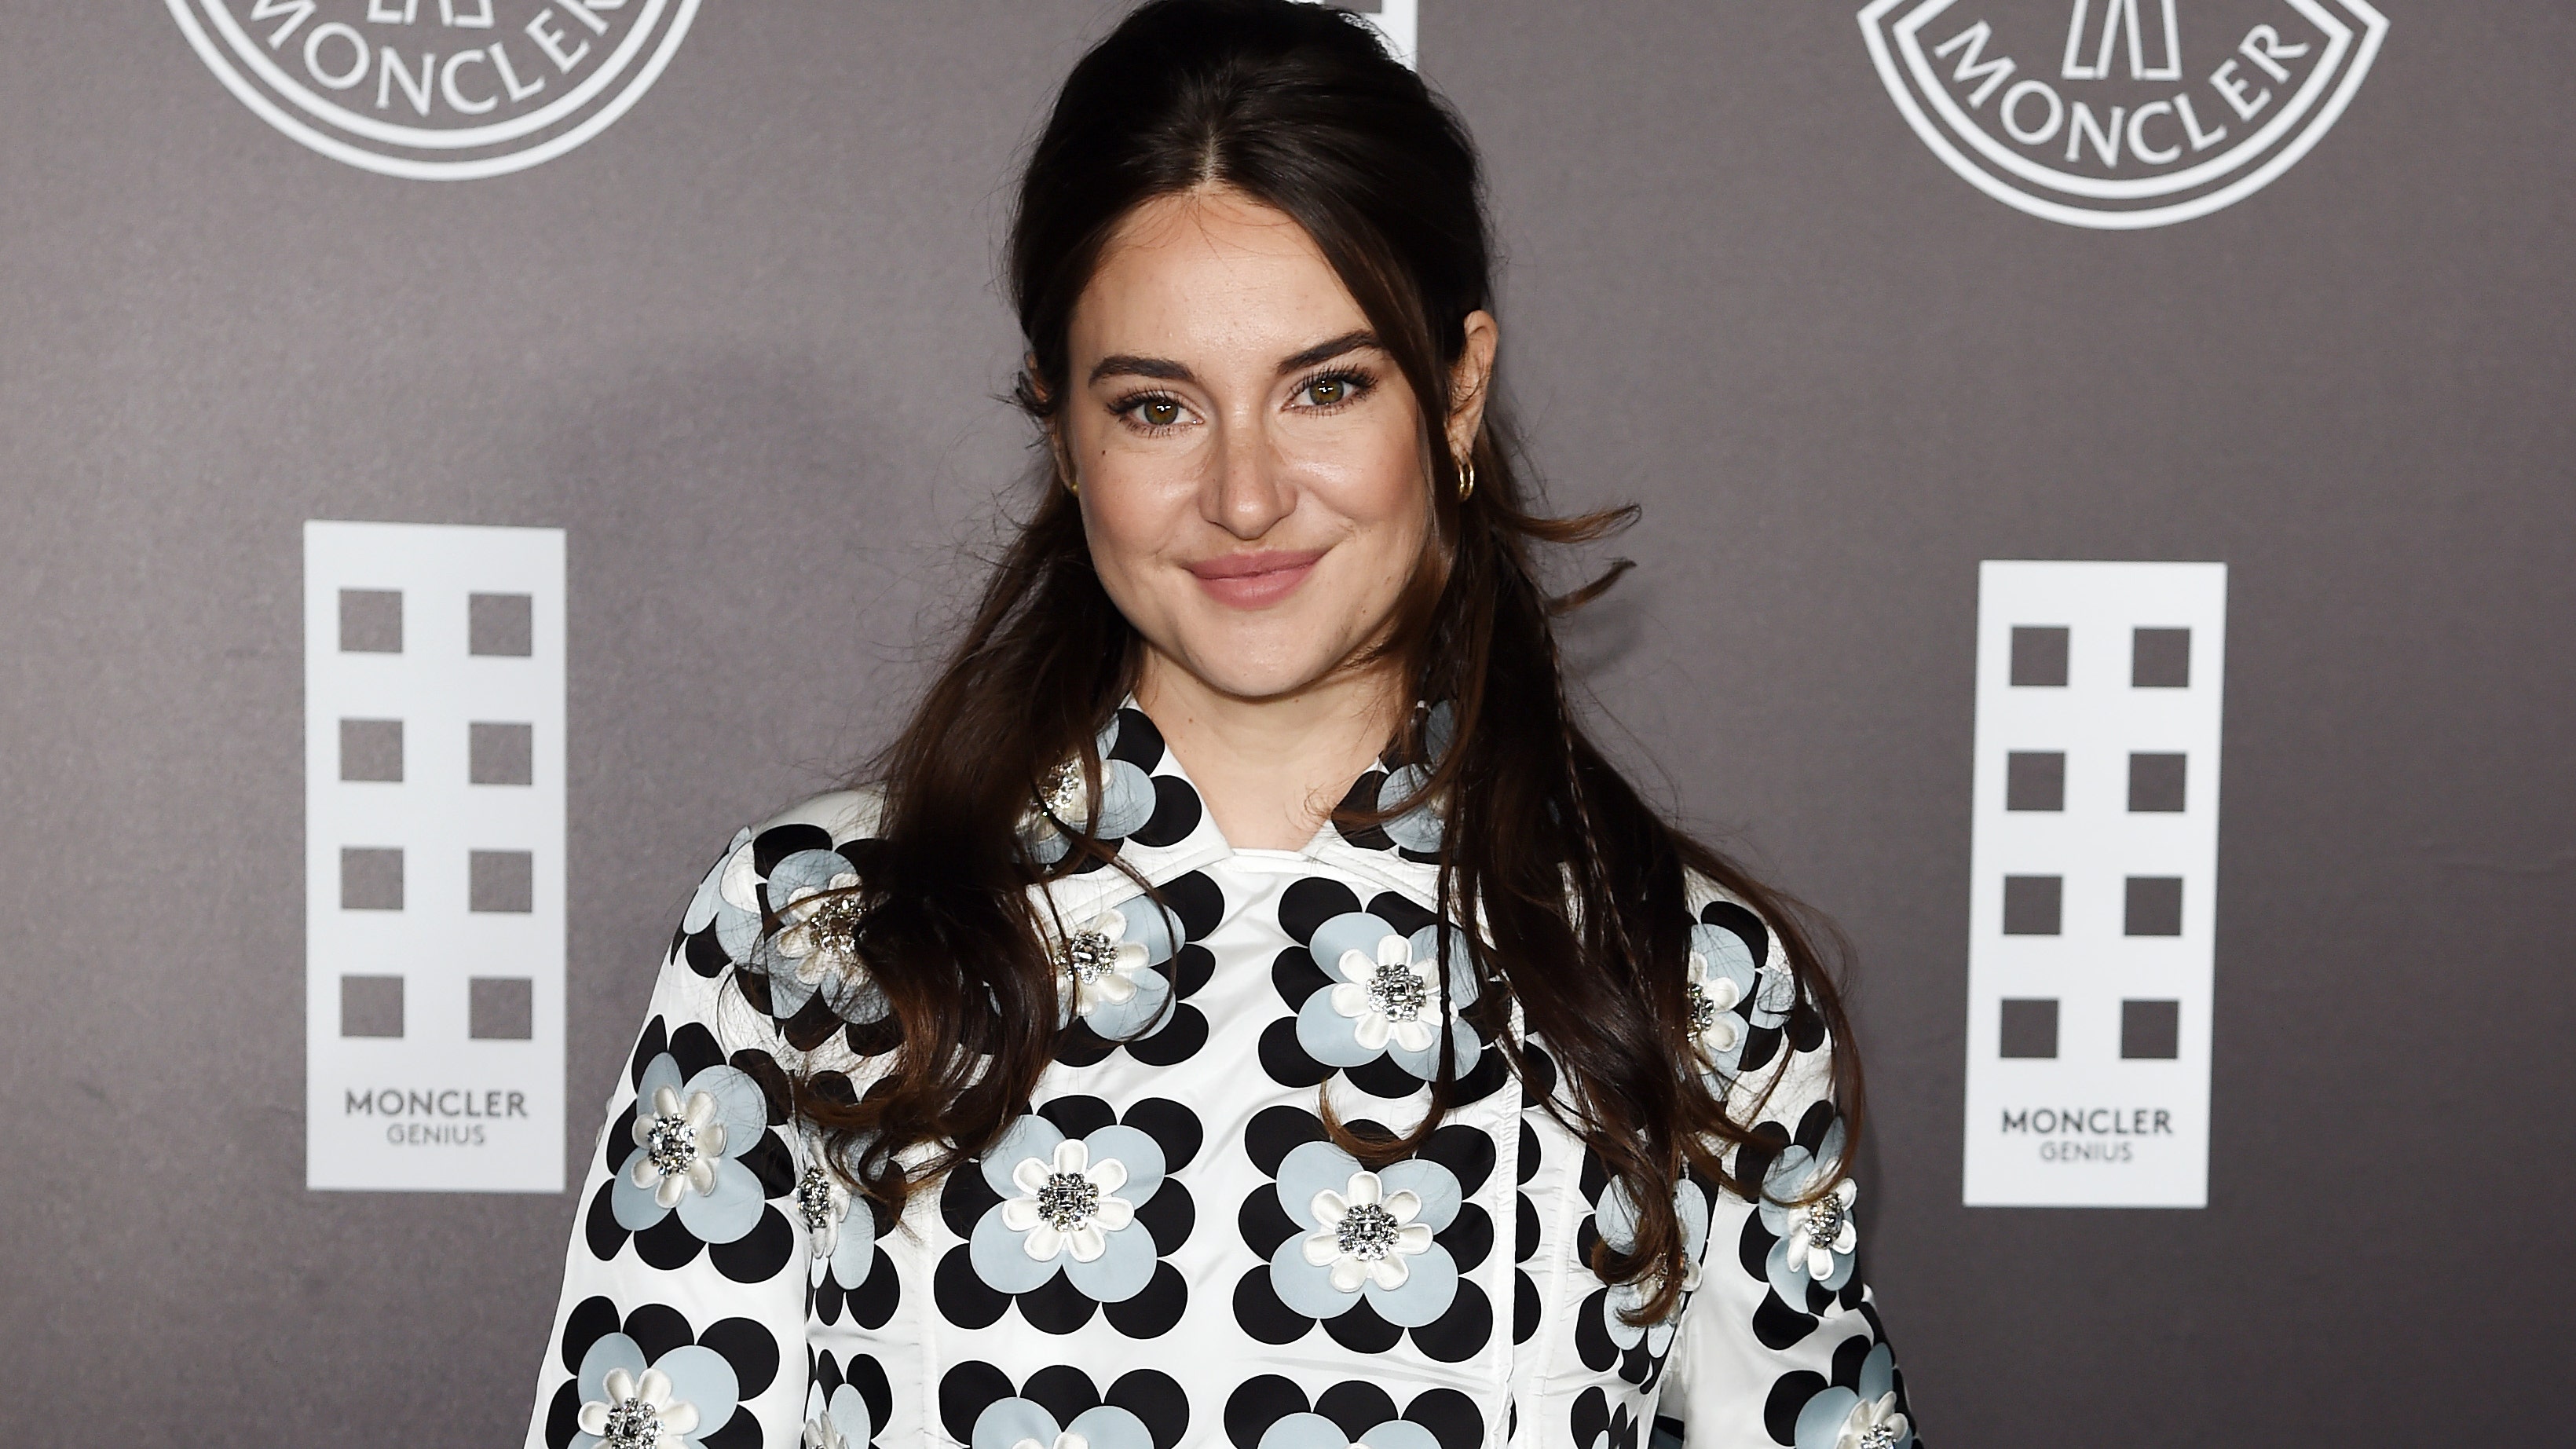 Shailene Woodley sends fans into frenzy with Instagram photo of baby feet: 'That a random baby?'